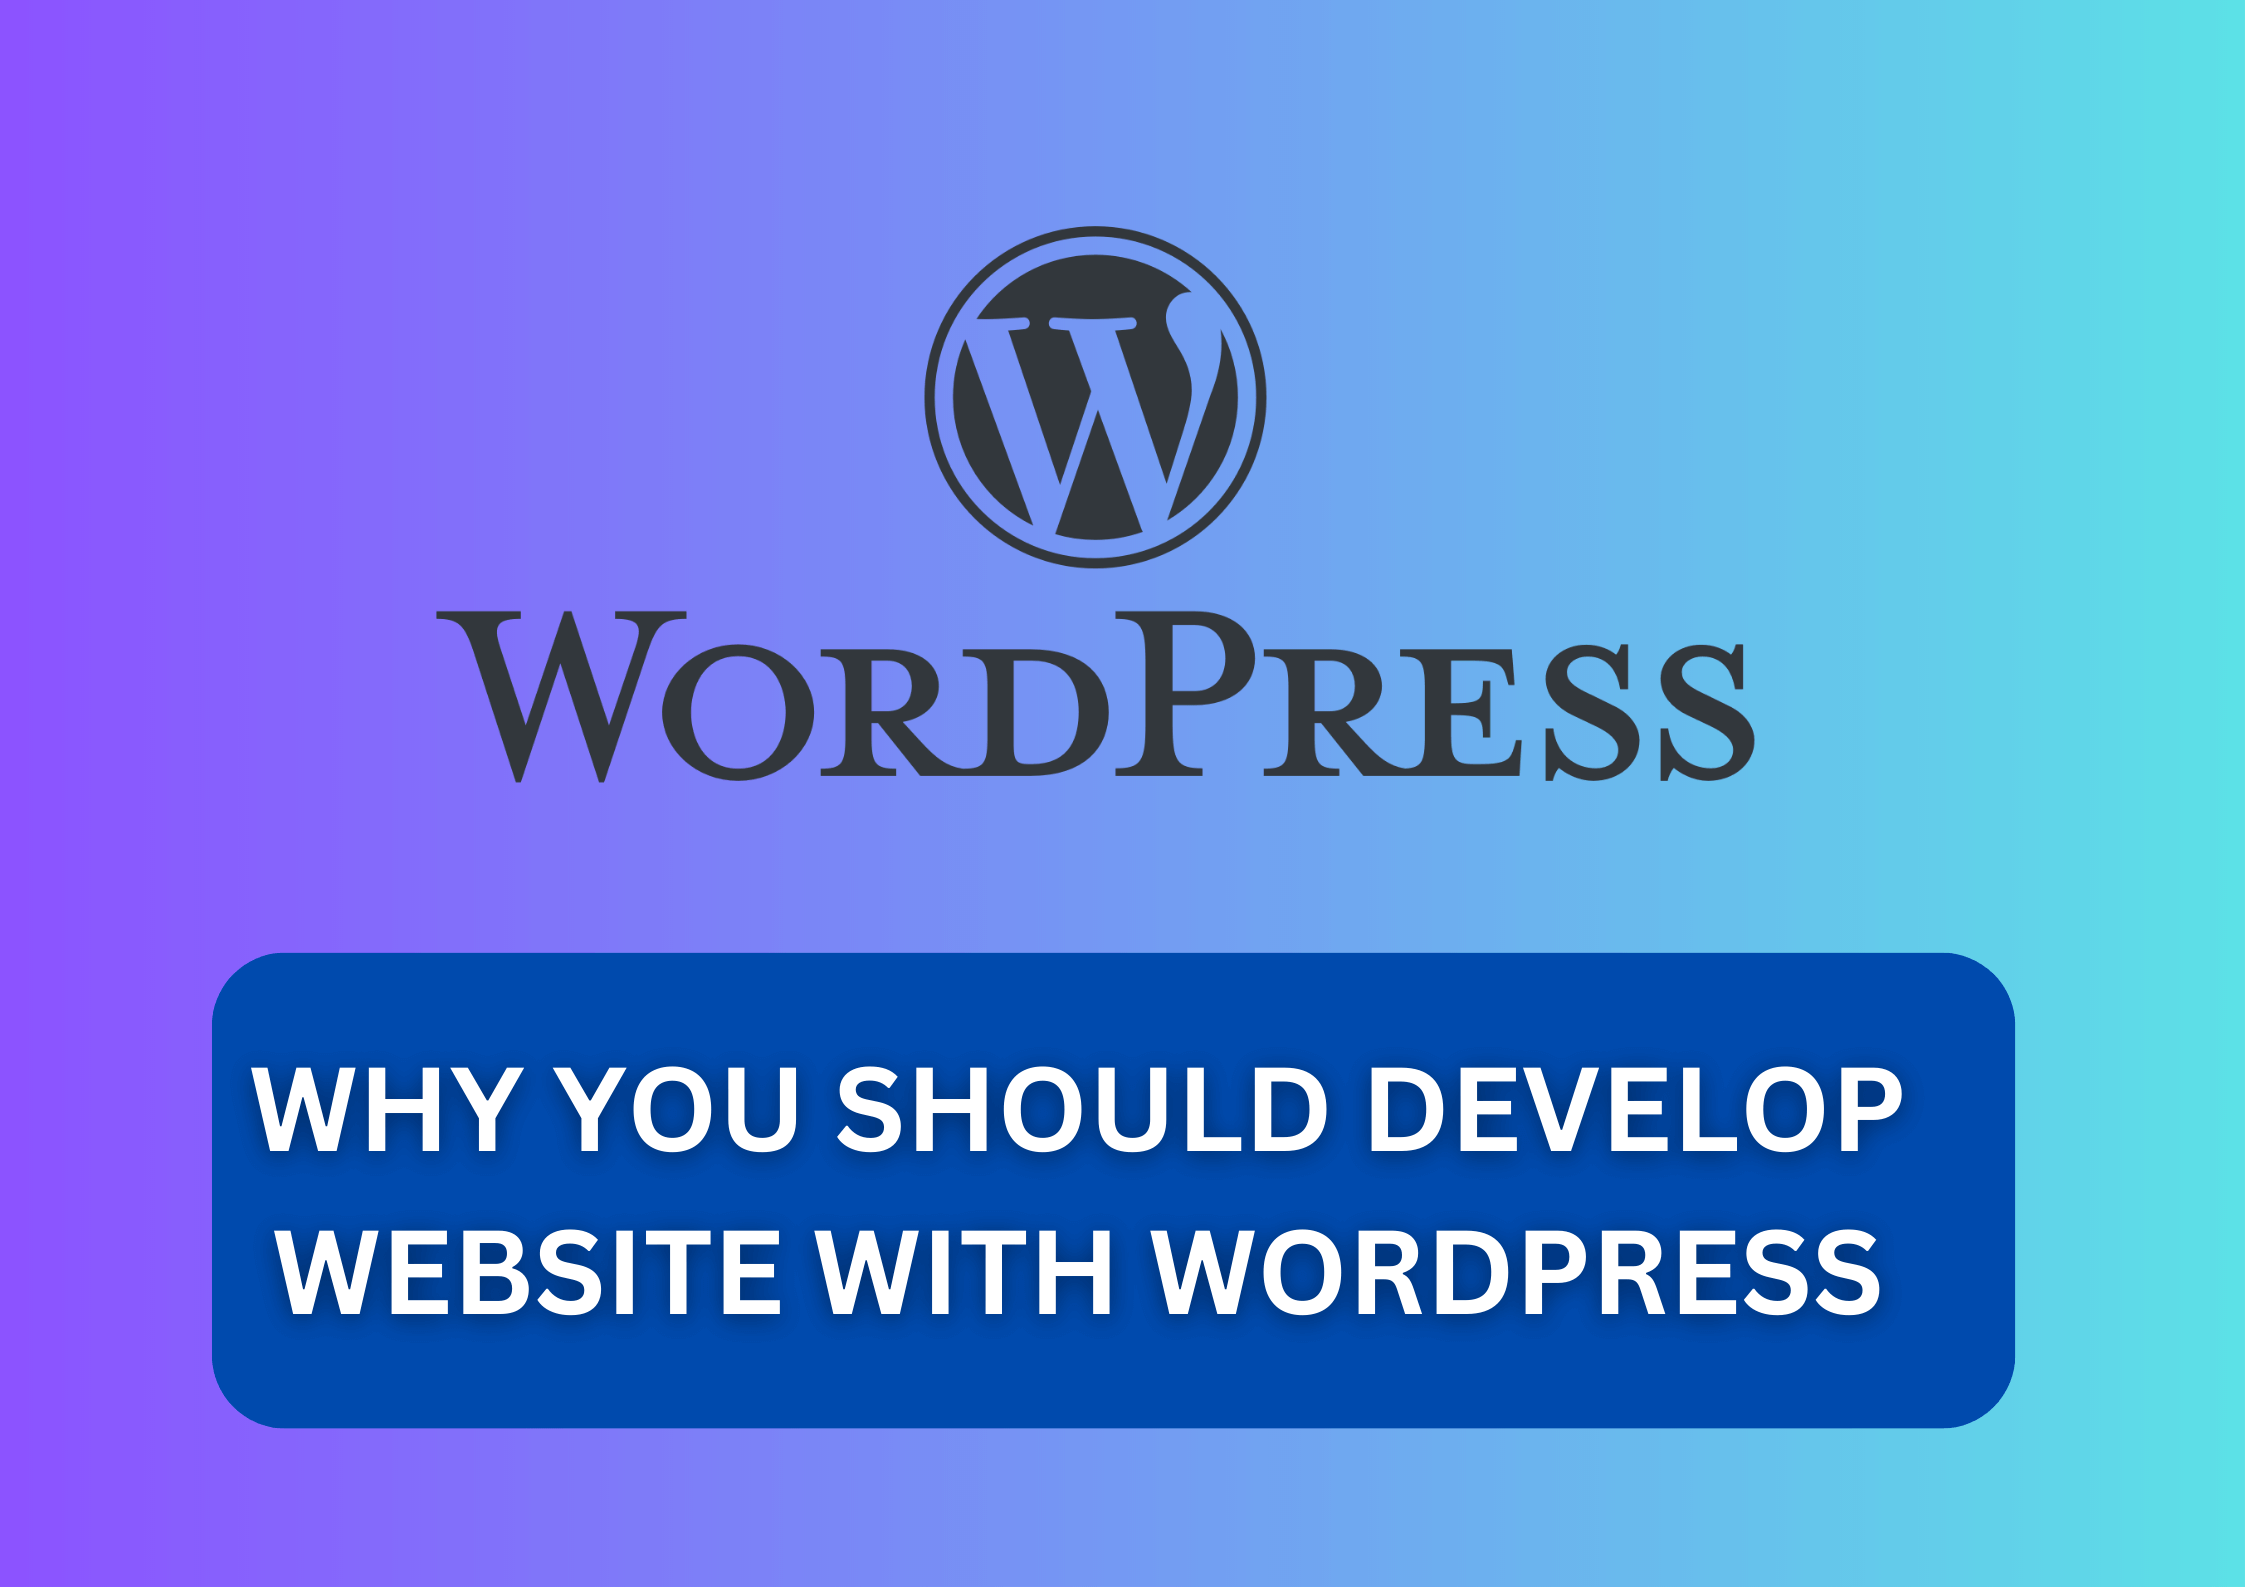 WHY YOU SHOULD DEVELOP WEBSITE WITH WORDPRESS